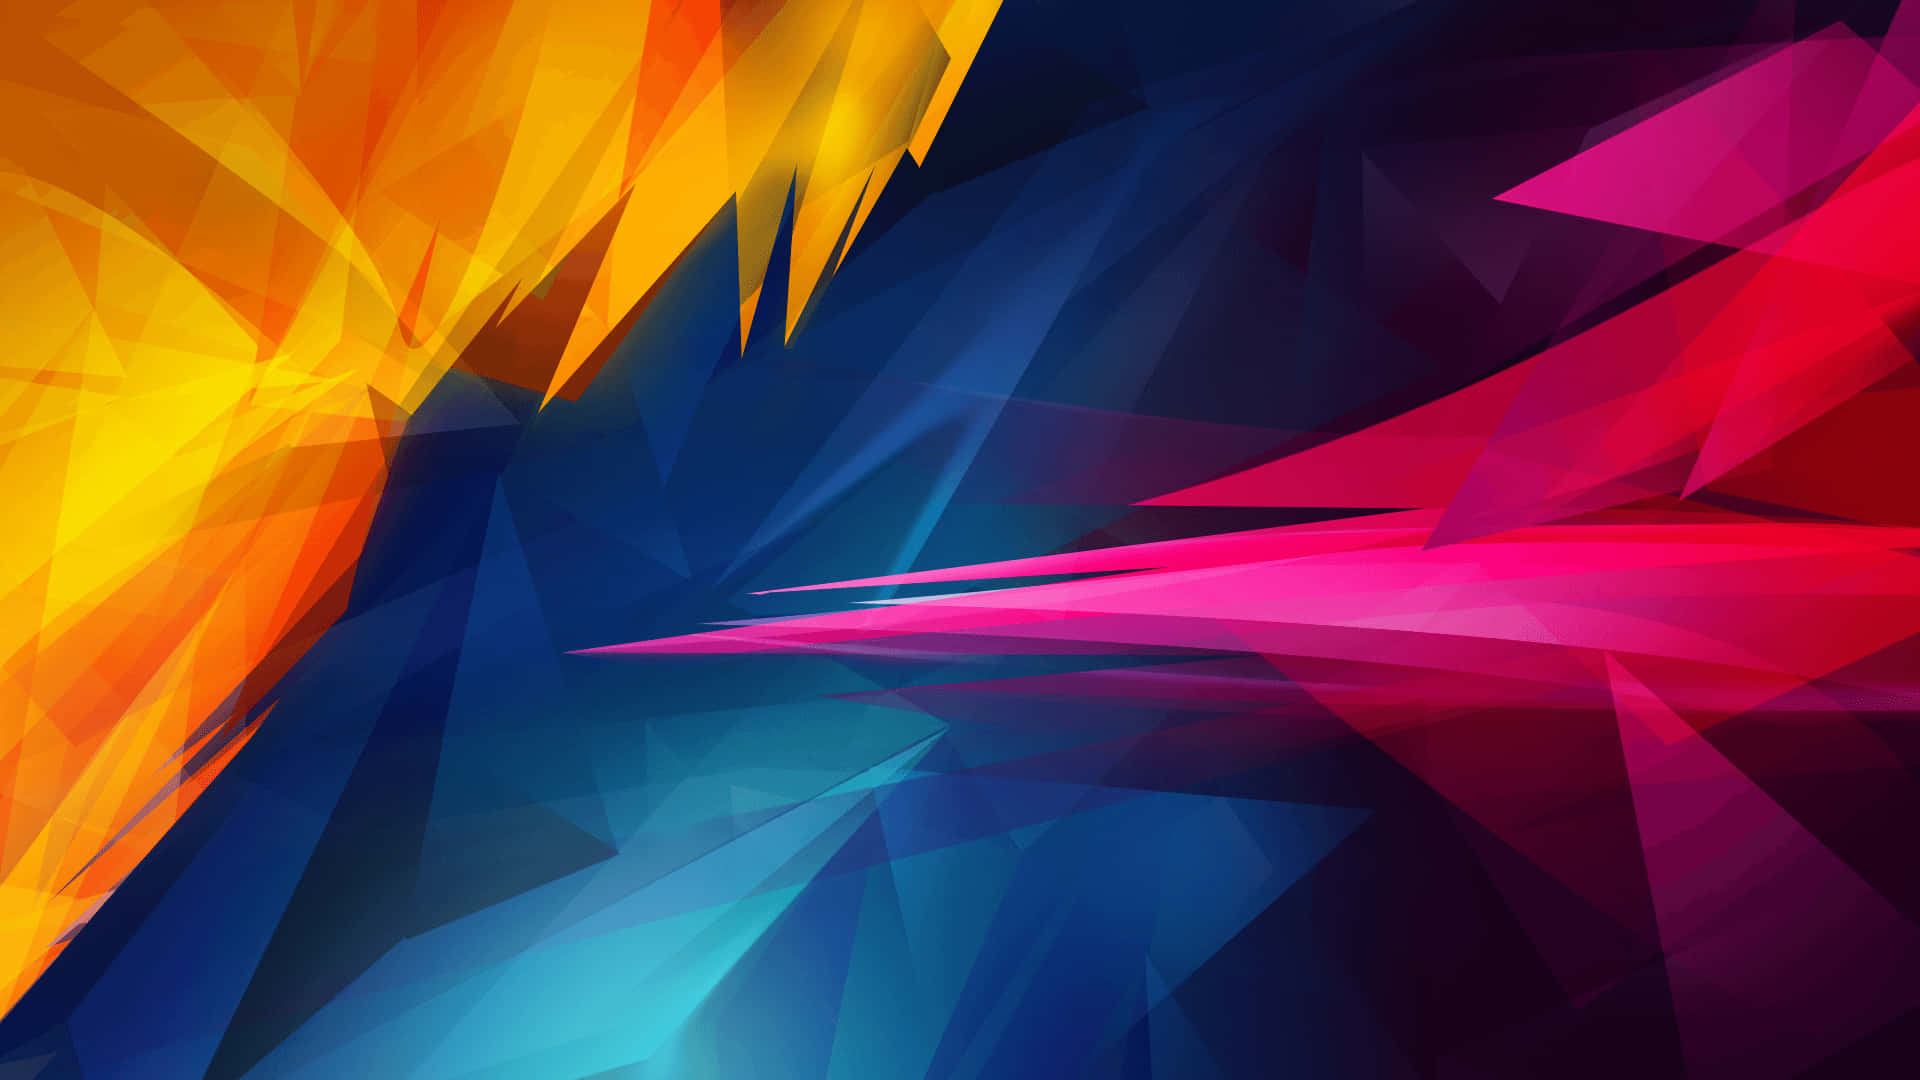 1500+] Abstract Backgrounds